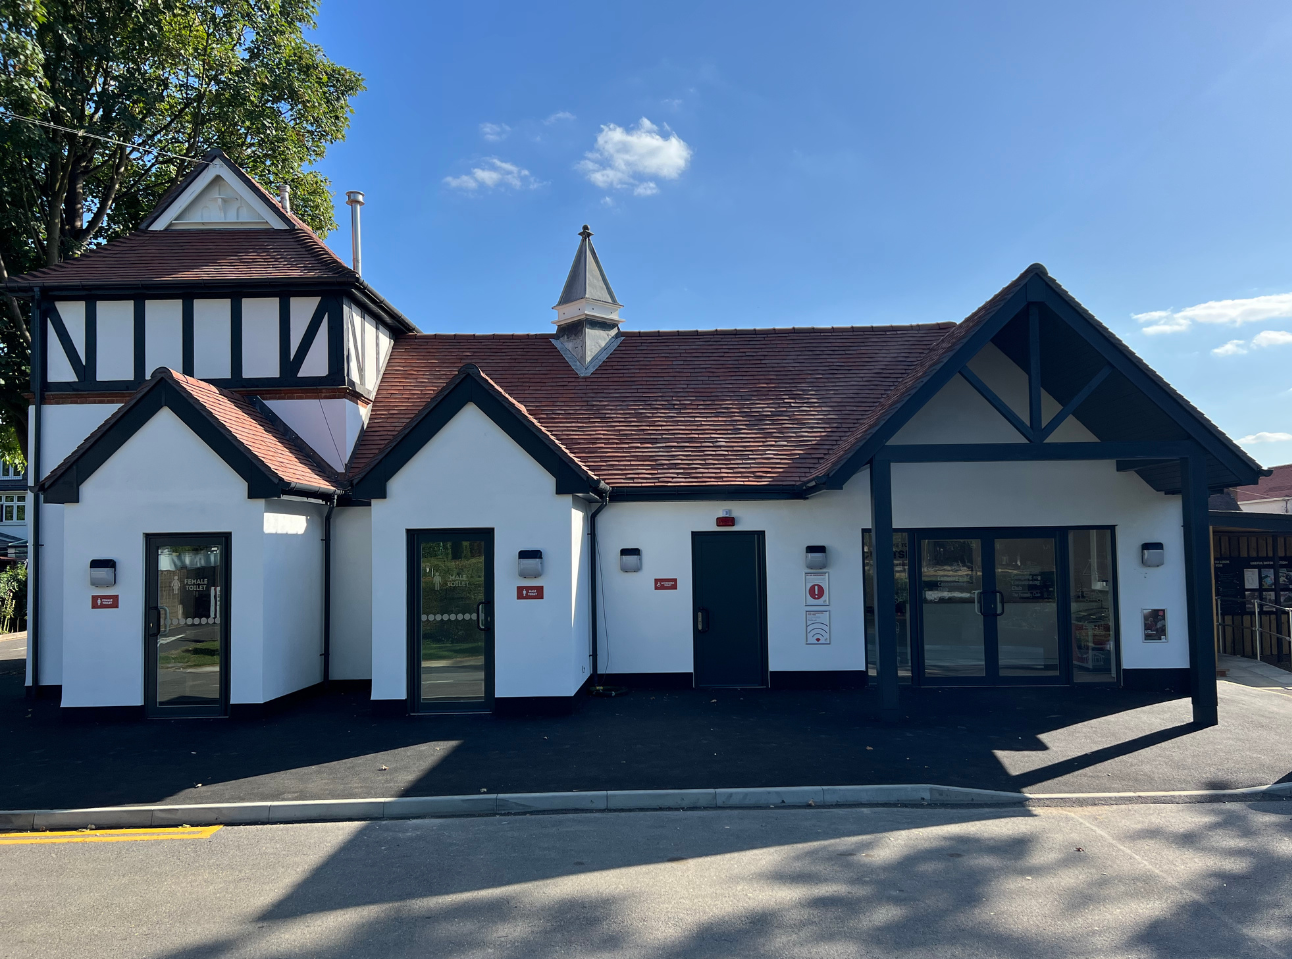 Chertsey Camping and Caravanning Club - Main Entrance After - Case Study